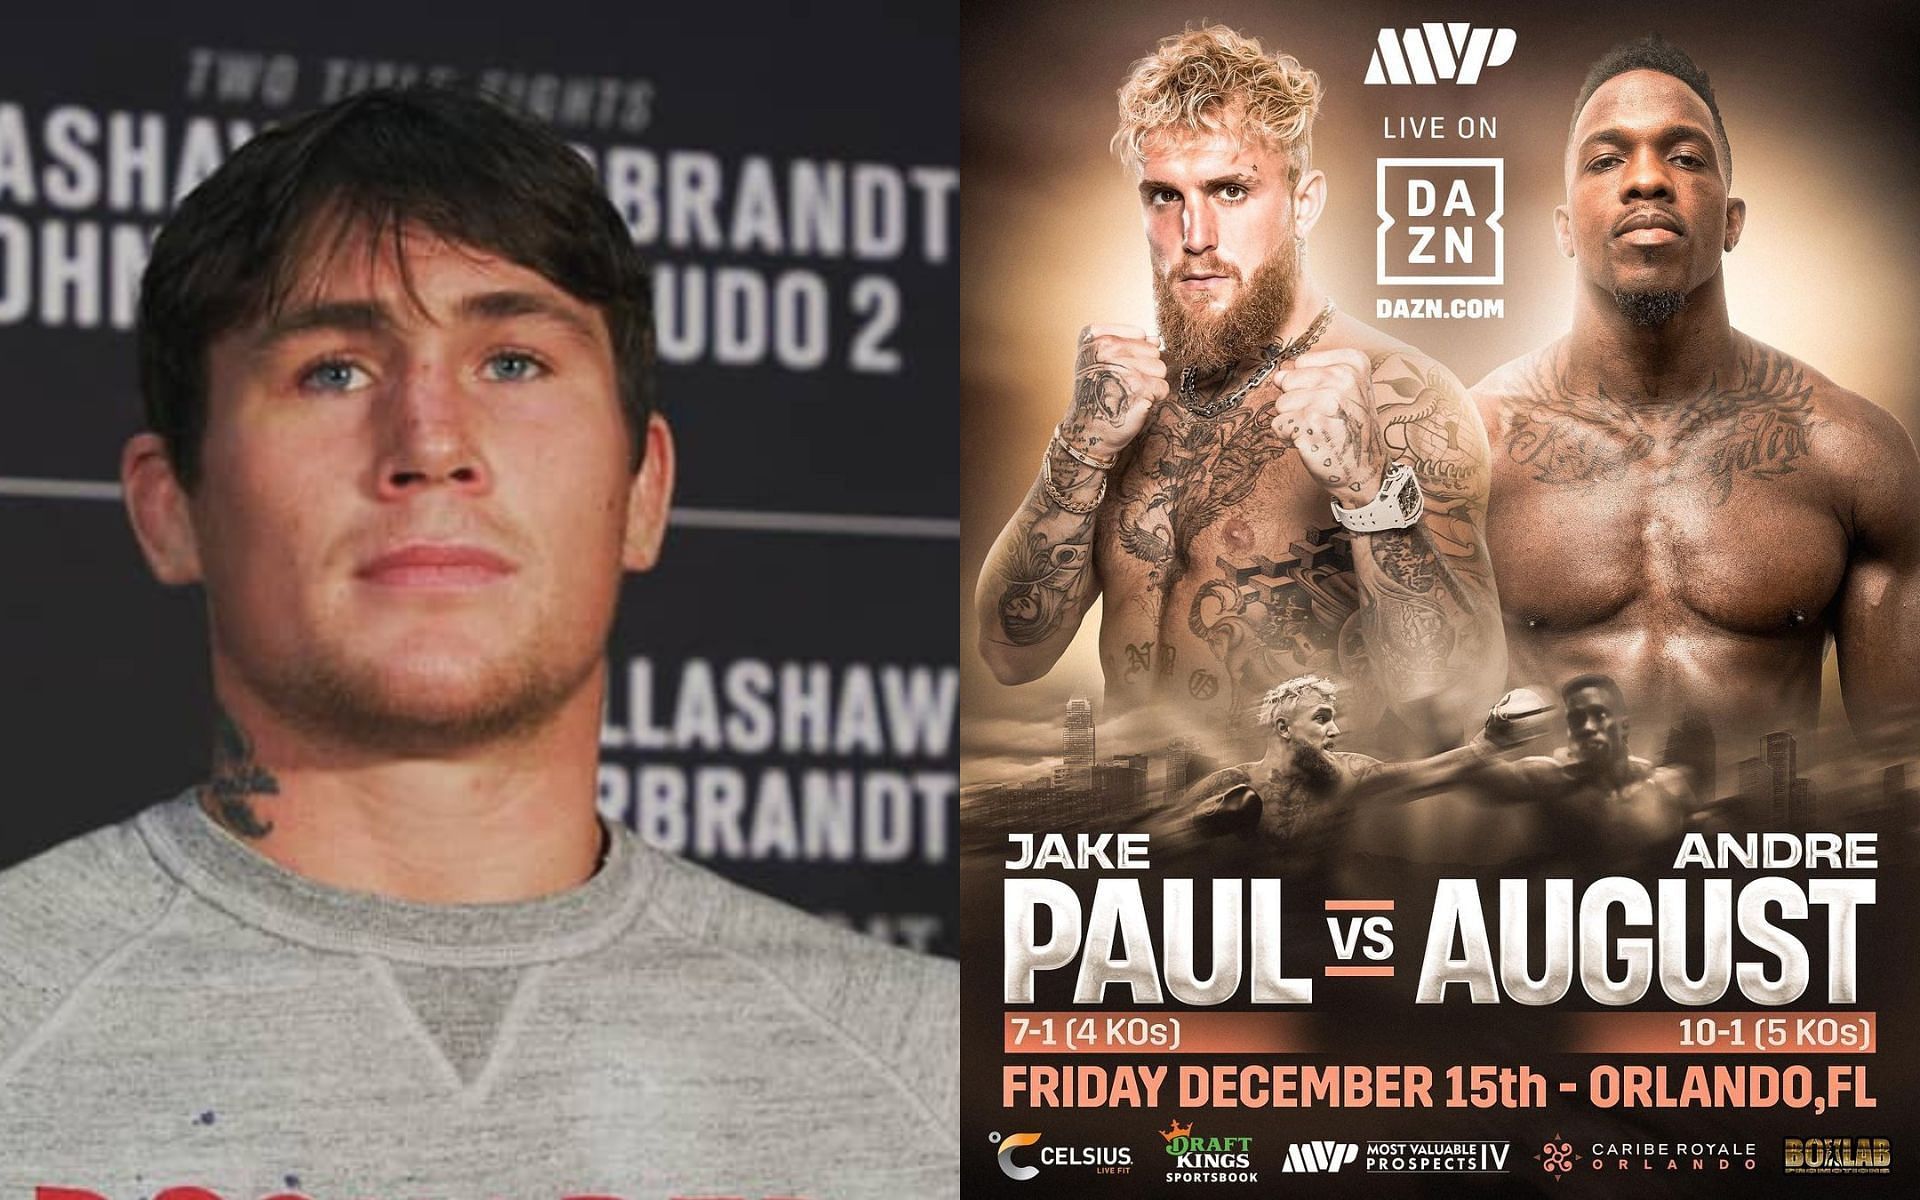 Darren Till (left) and Jake Paul vs Andre August fight poster (right) (Image credits @darrentill2.0 and @jakepaul on Instagram)